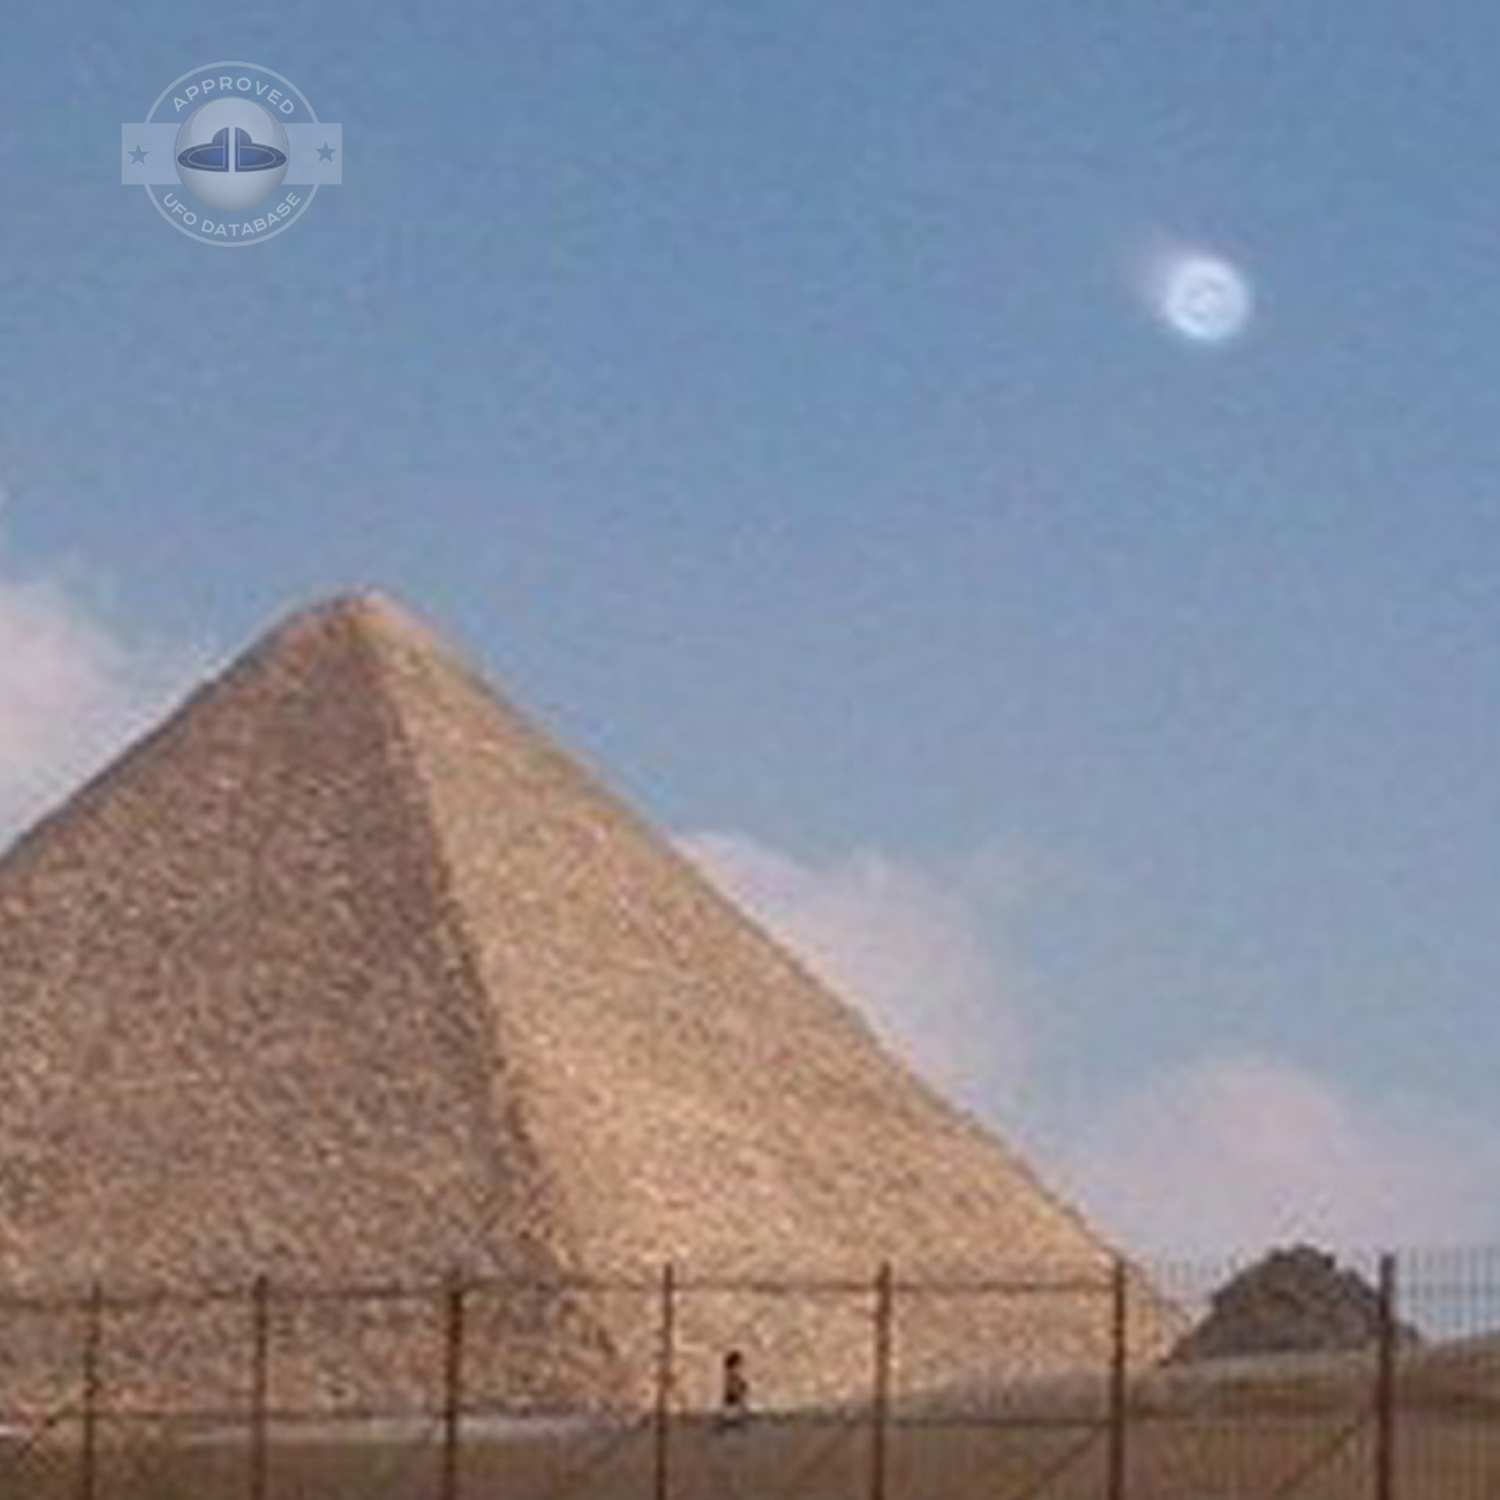 UFO picture near the famous Great Sphinx of Giza by a tourist | Egypt UFO Picture #143-5